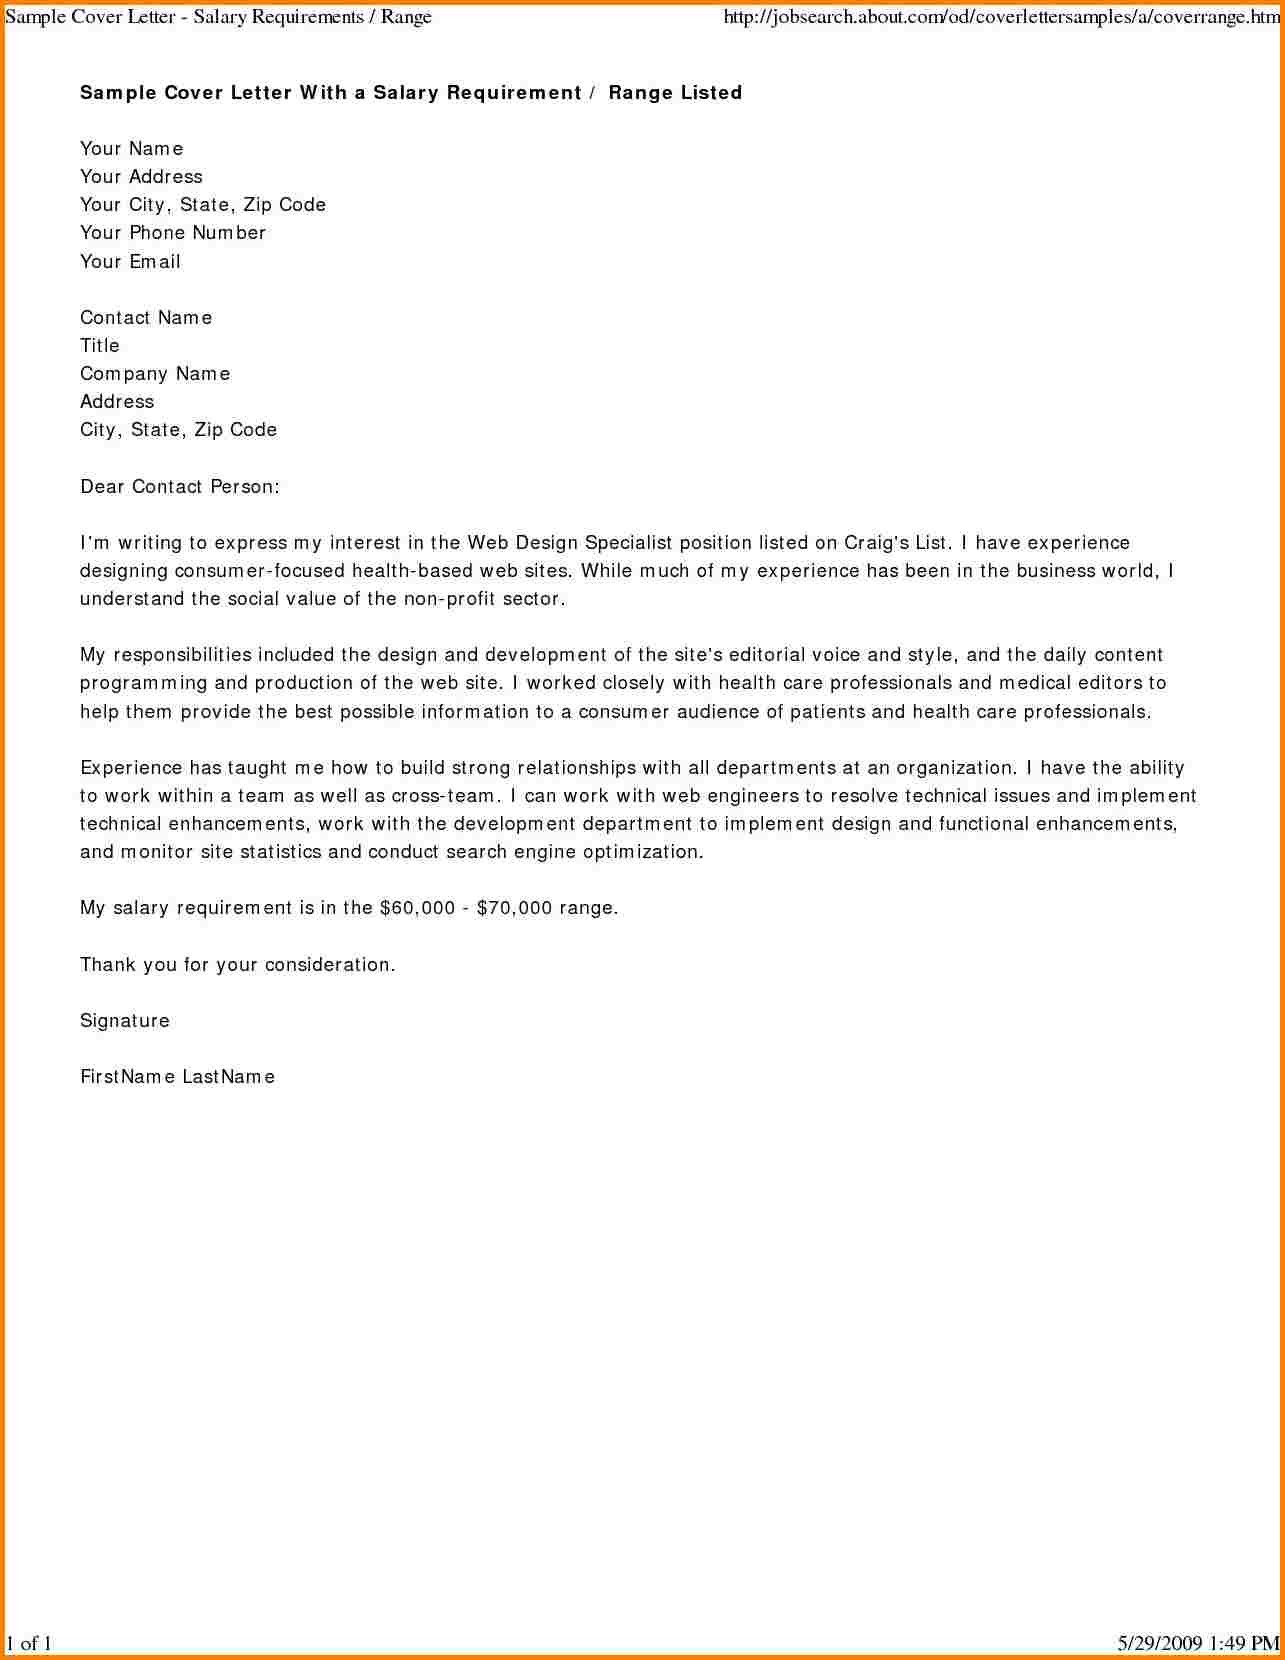 Payroll Error Letter Template - Request Letter format for Correction In Name Fresh 23 Payroll